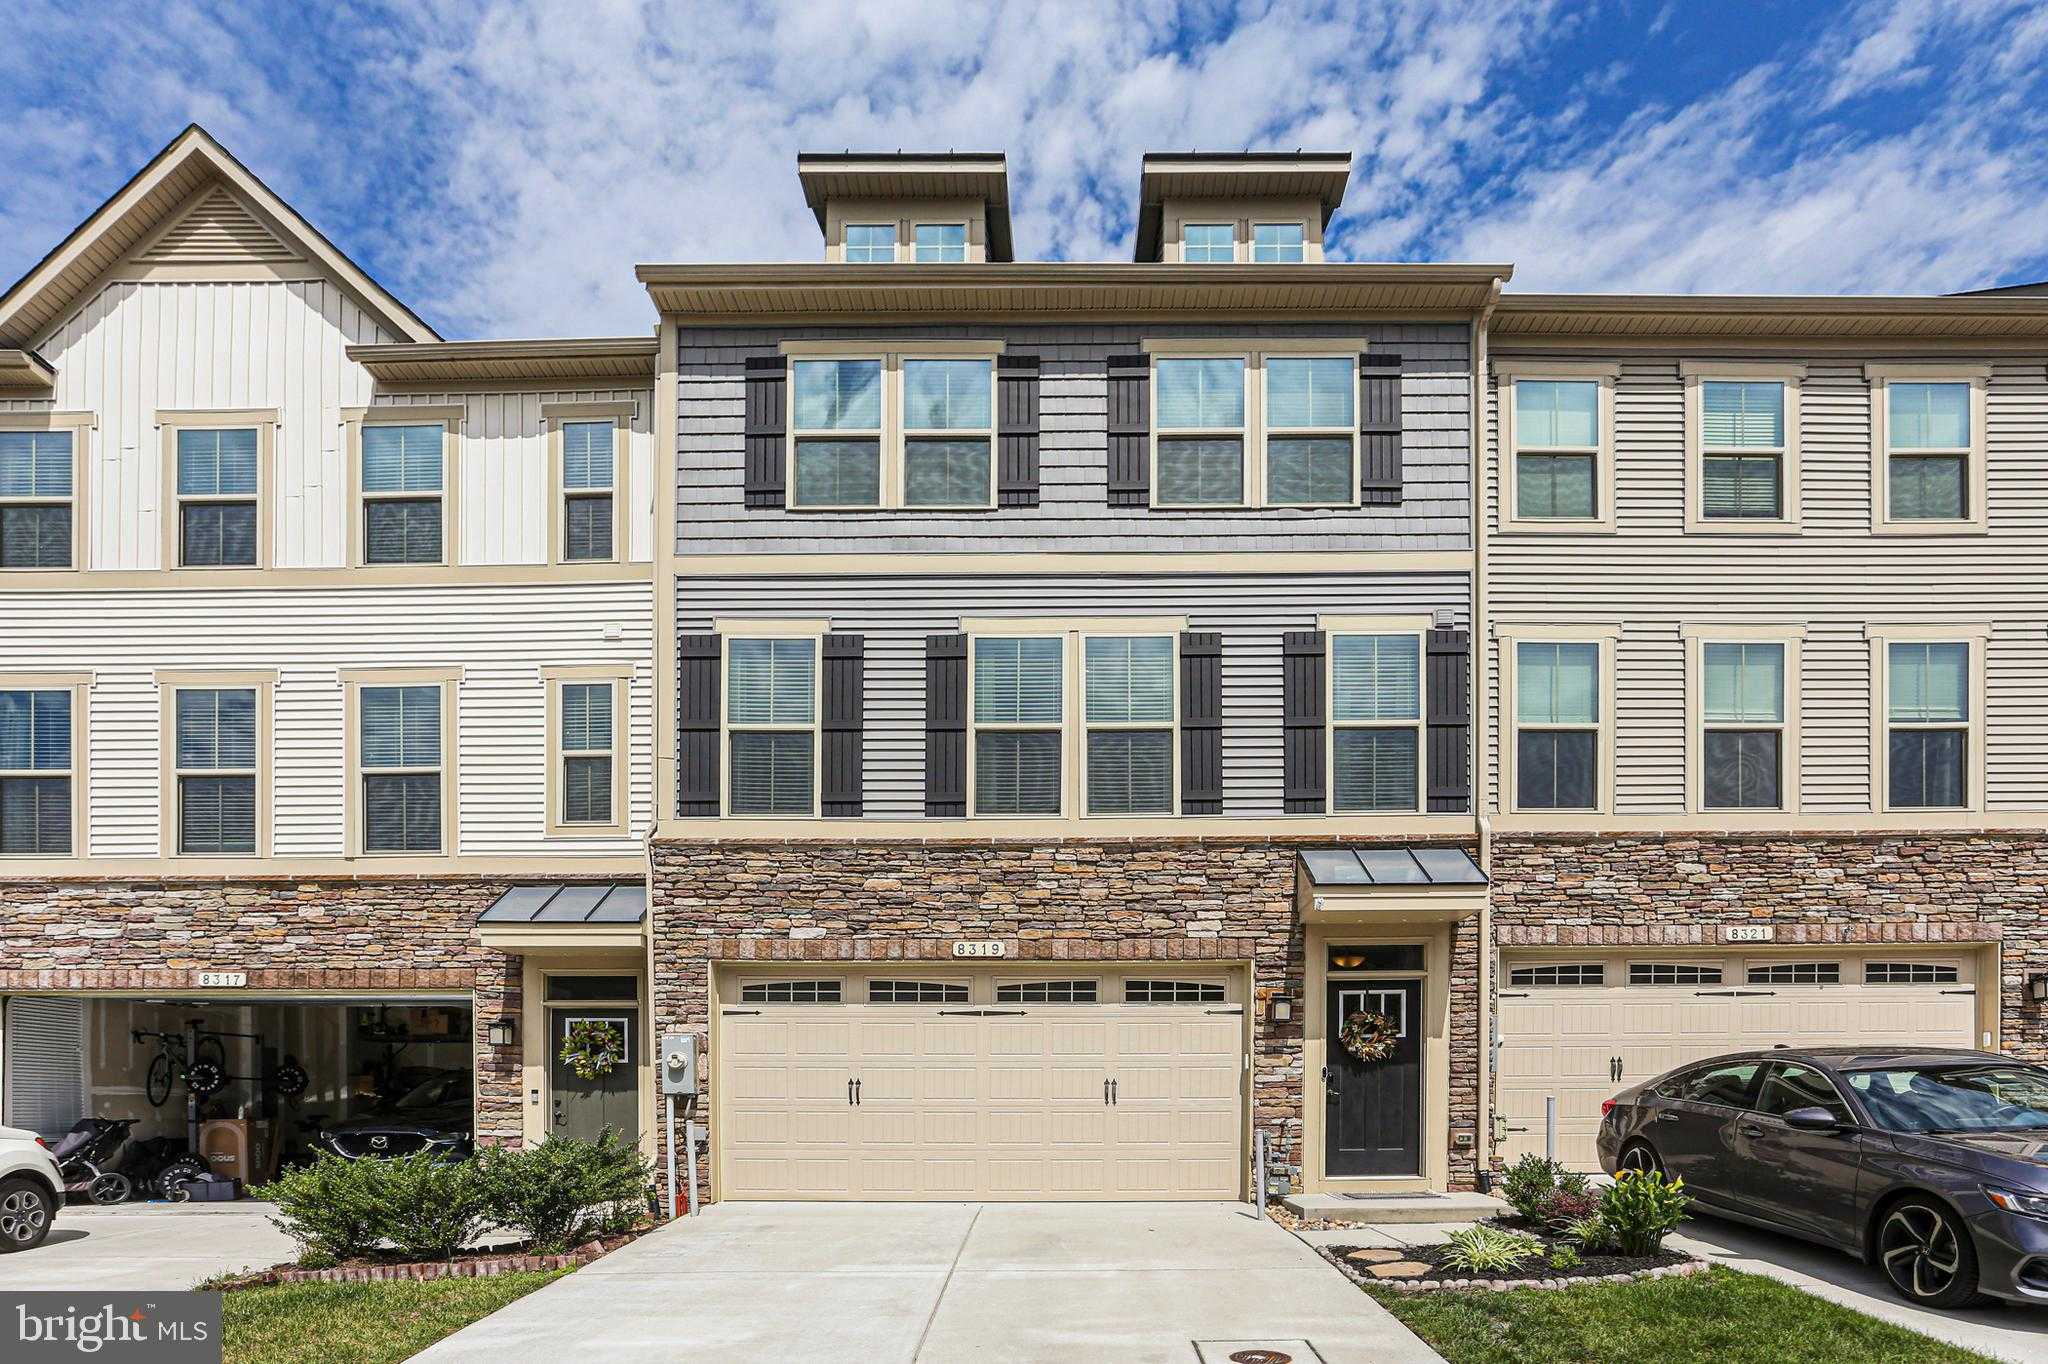 View MILLERSVILLE, MD 21108 townhome